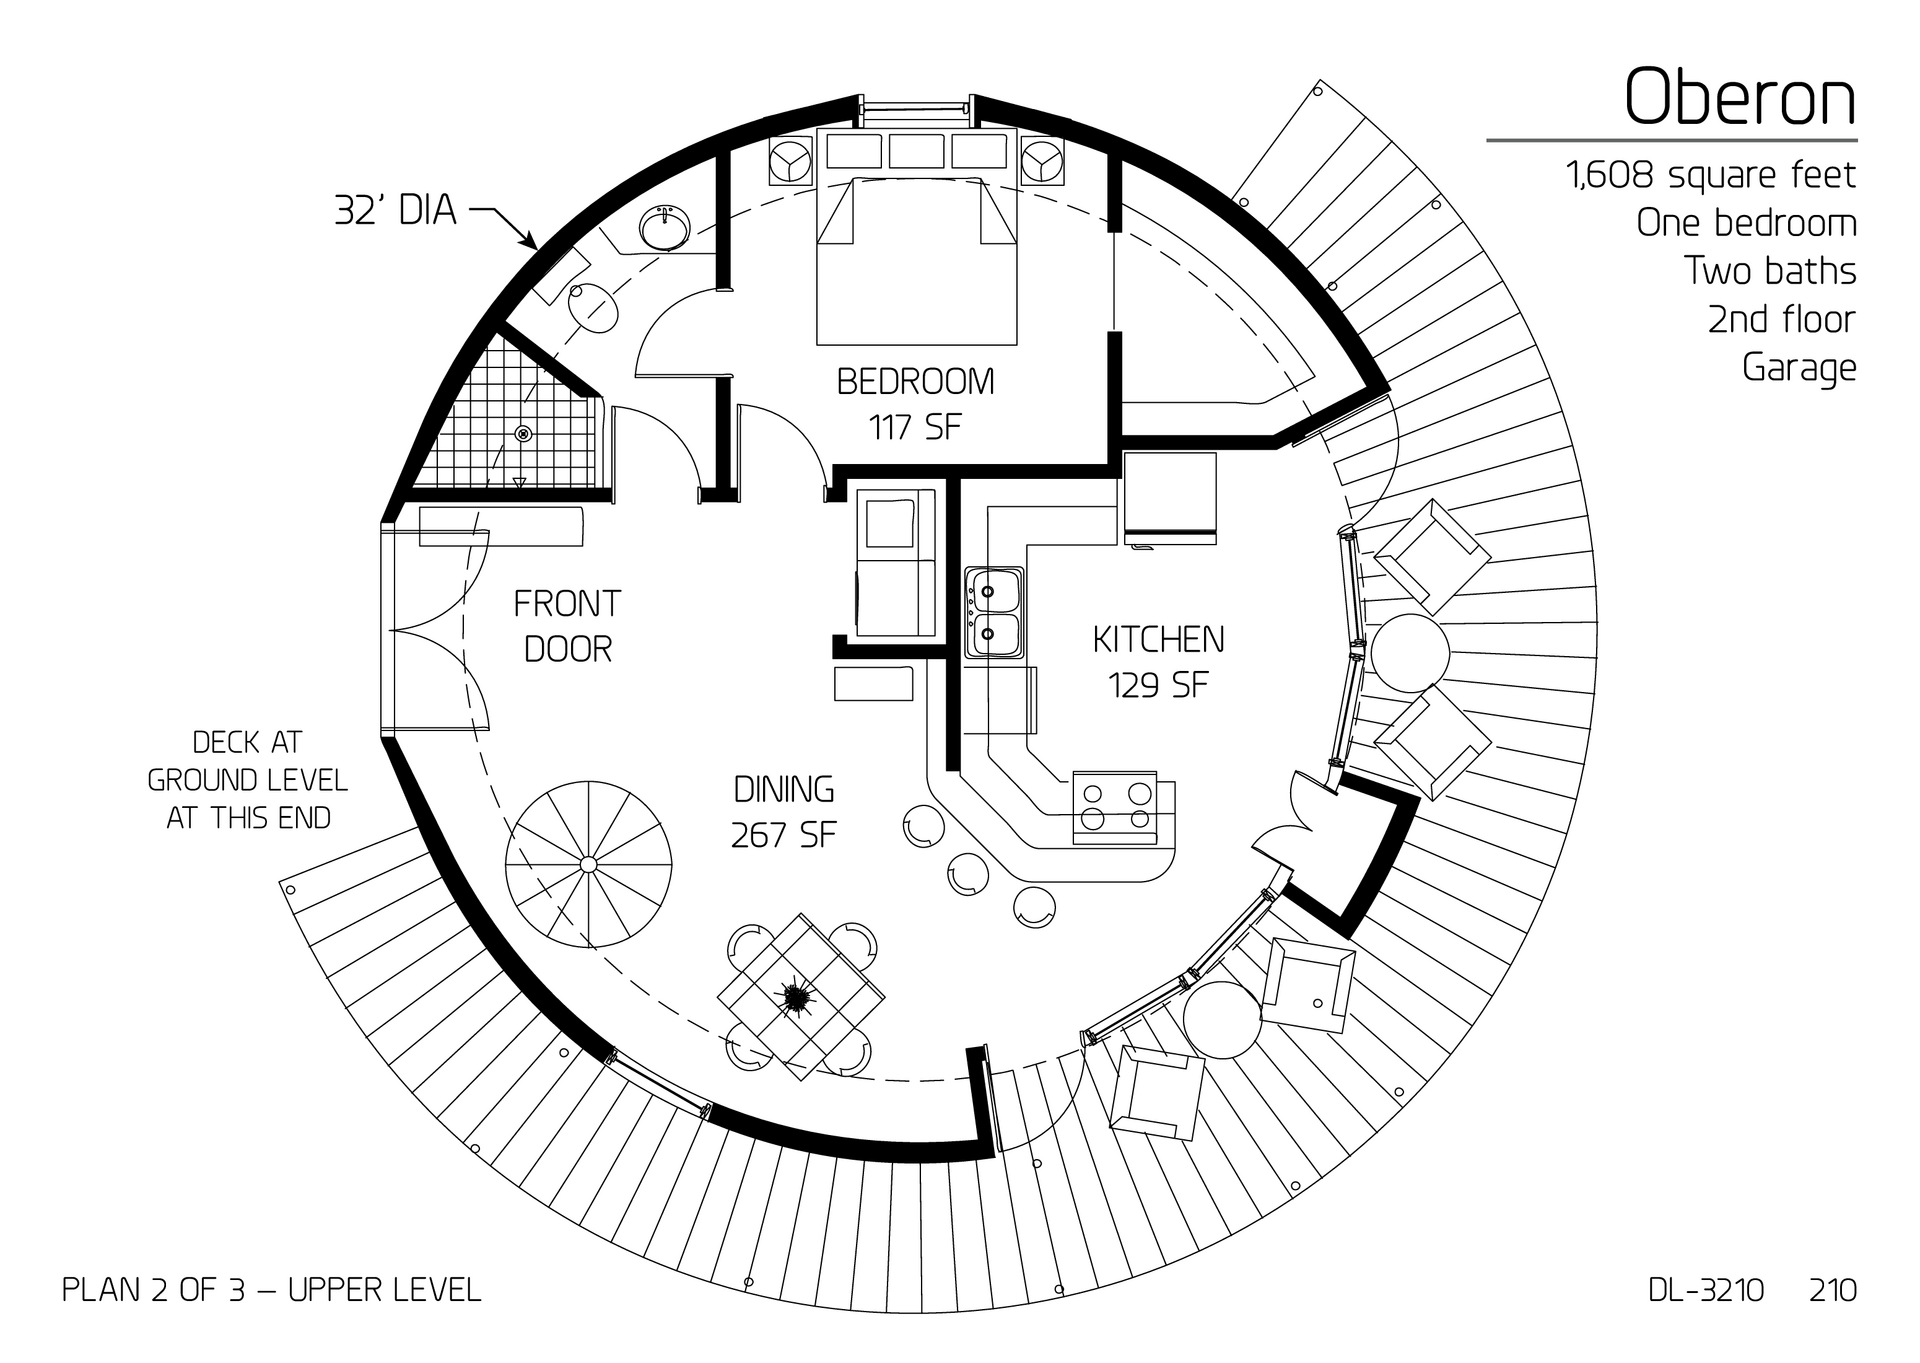 Oberon: The Main Floor of a Two-level, 32' Diameter, 1,608 SF, One-bedroom, One and a Half-Bath Floor Plan.